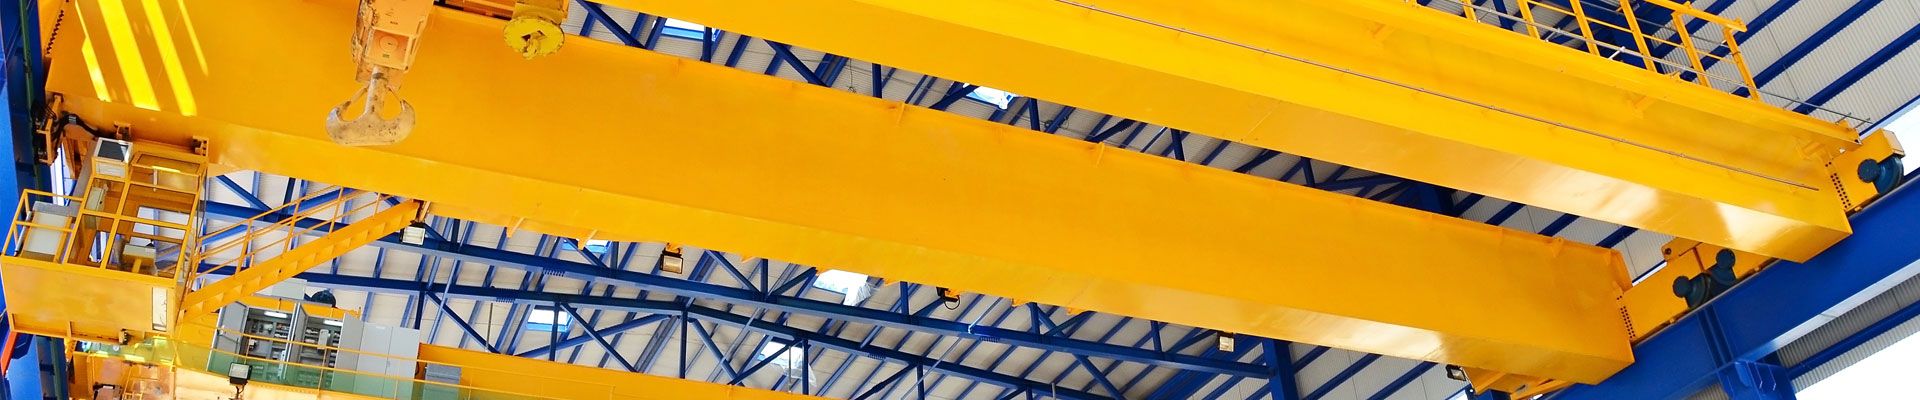 Yellow overhead cranes used for training